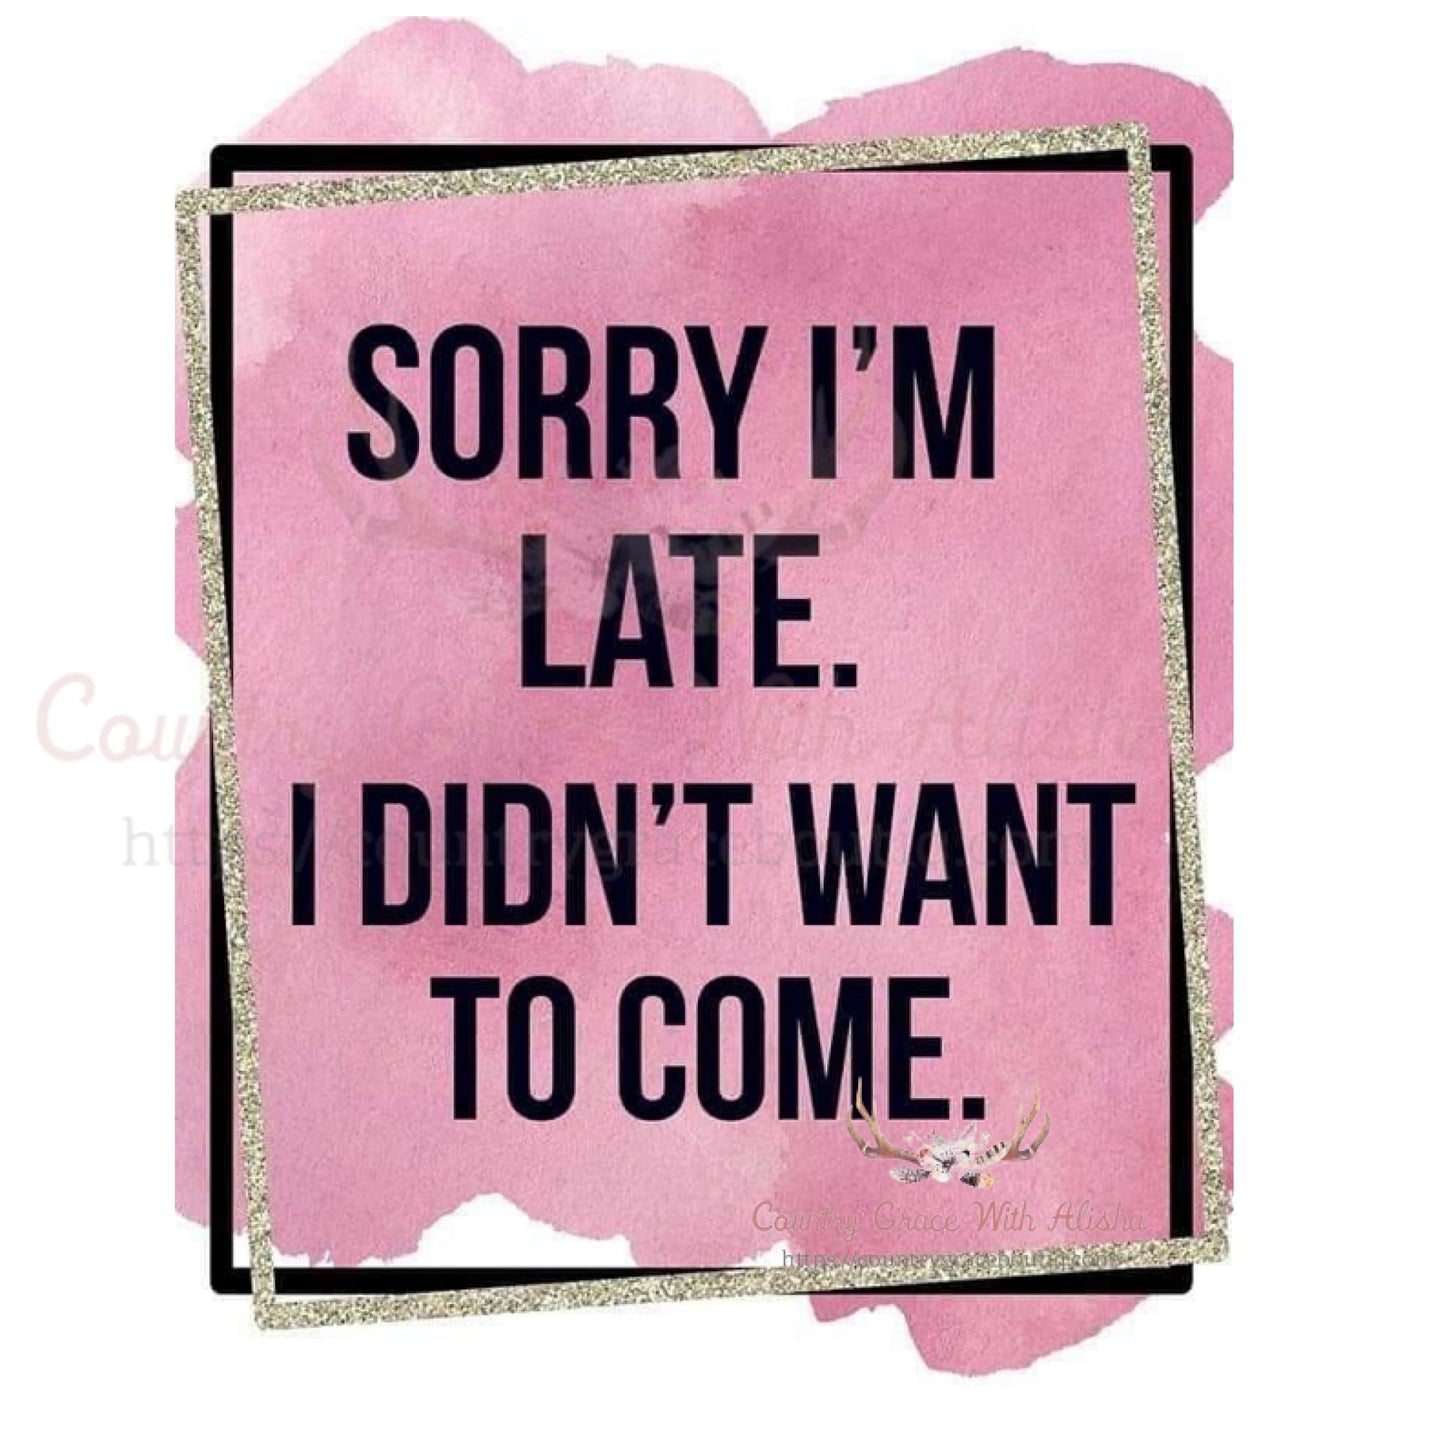 Sorry I’m Late Sublimation Transfer - Sub $1.50 Country 